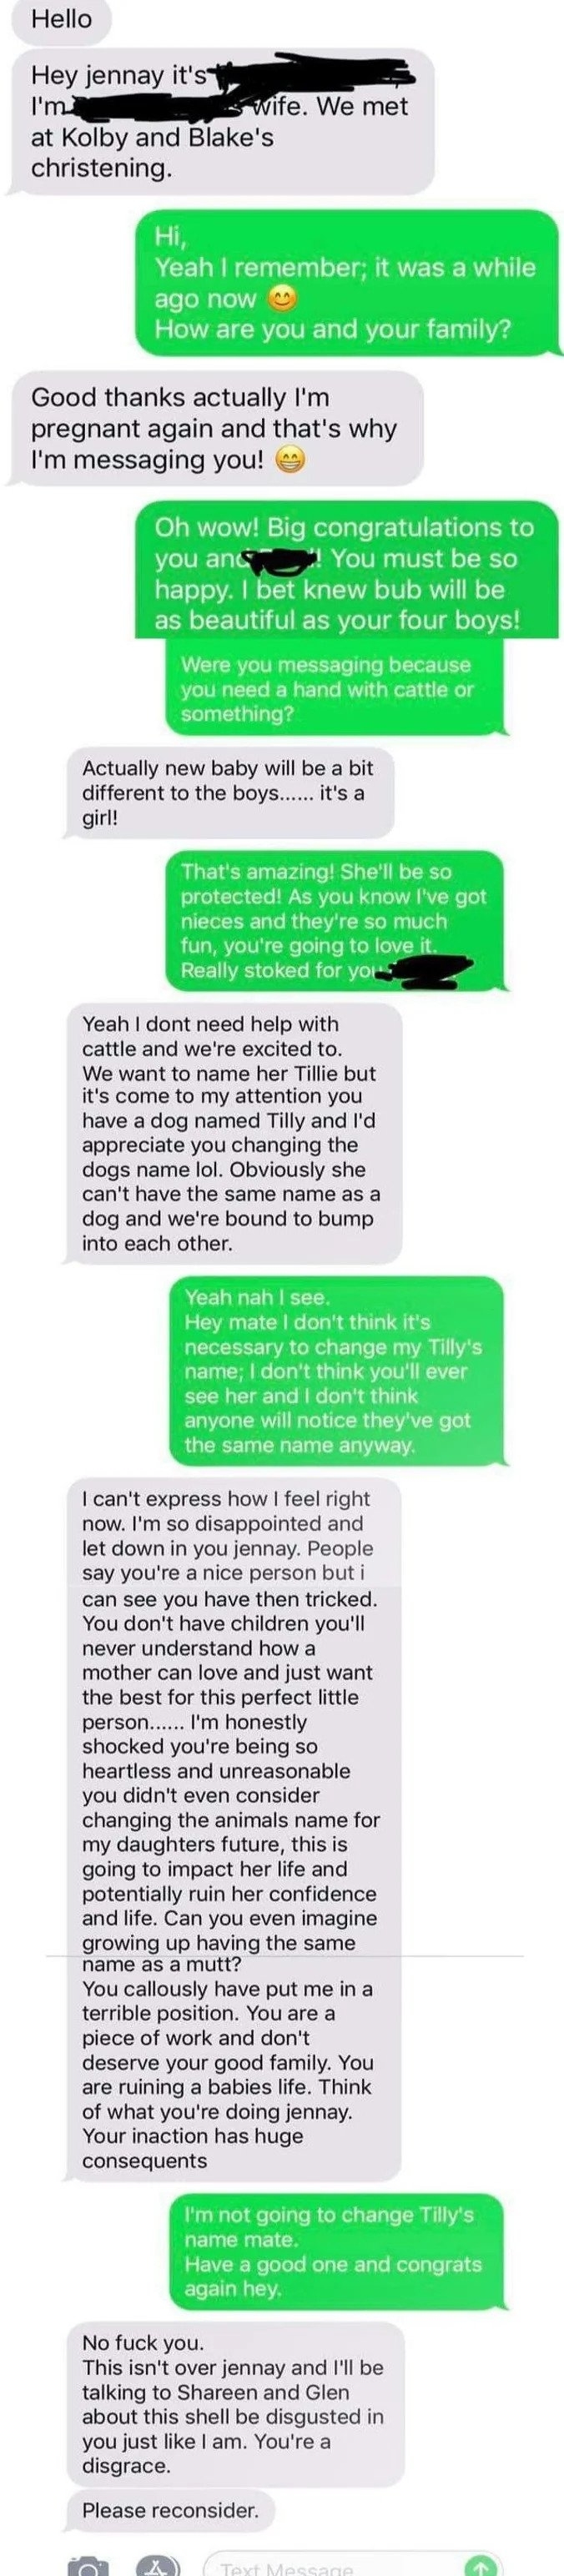 &quot;I&#x27;m not going to change Tilly&#x27;s name mate.&quot;